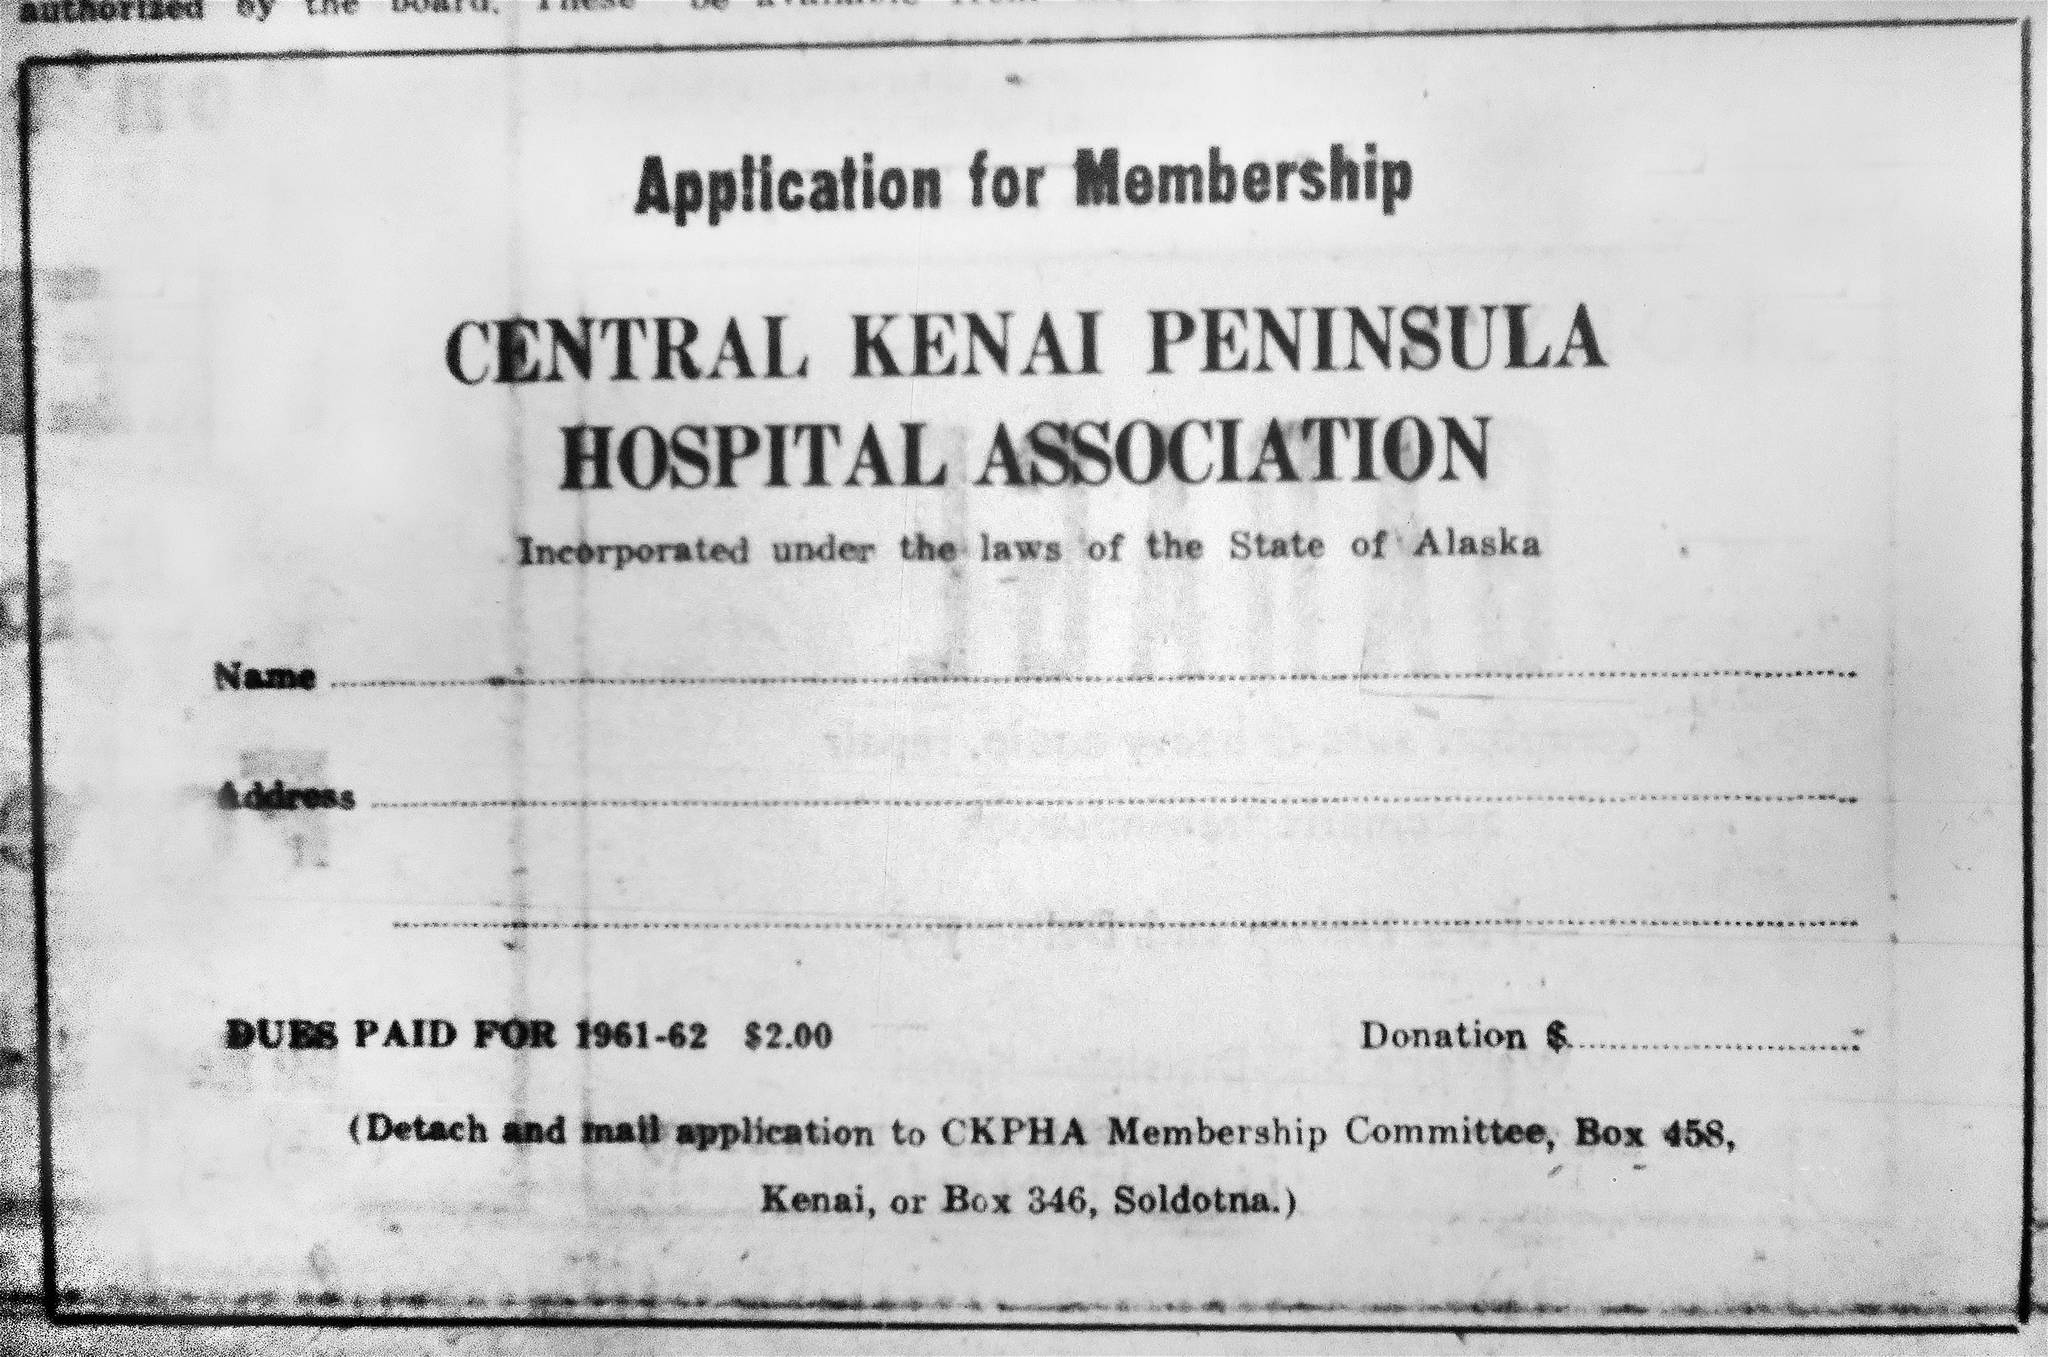 This clippable application for membership in the Central Kenai Peninsula Hospital Association appeared in the Cheechako News in 1961.